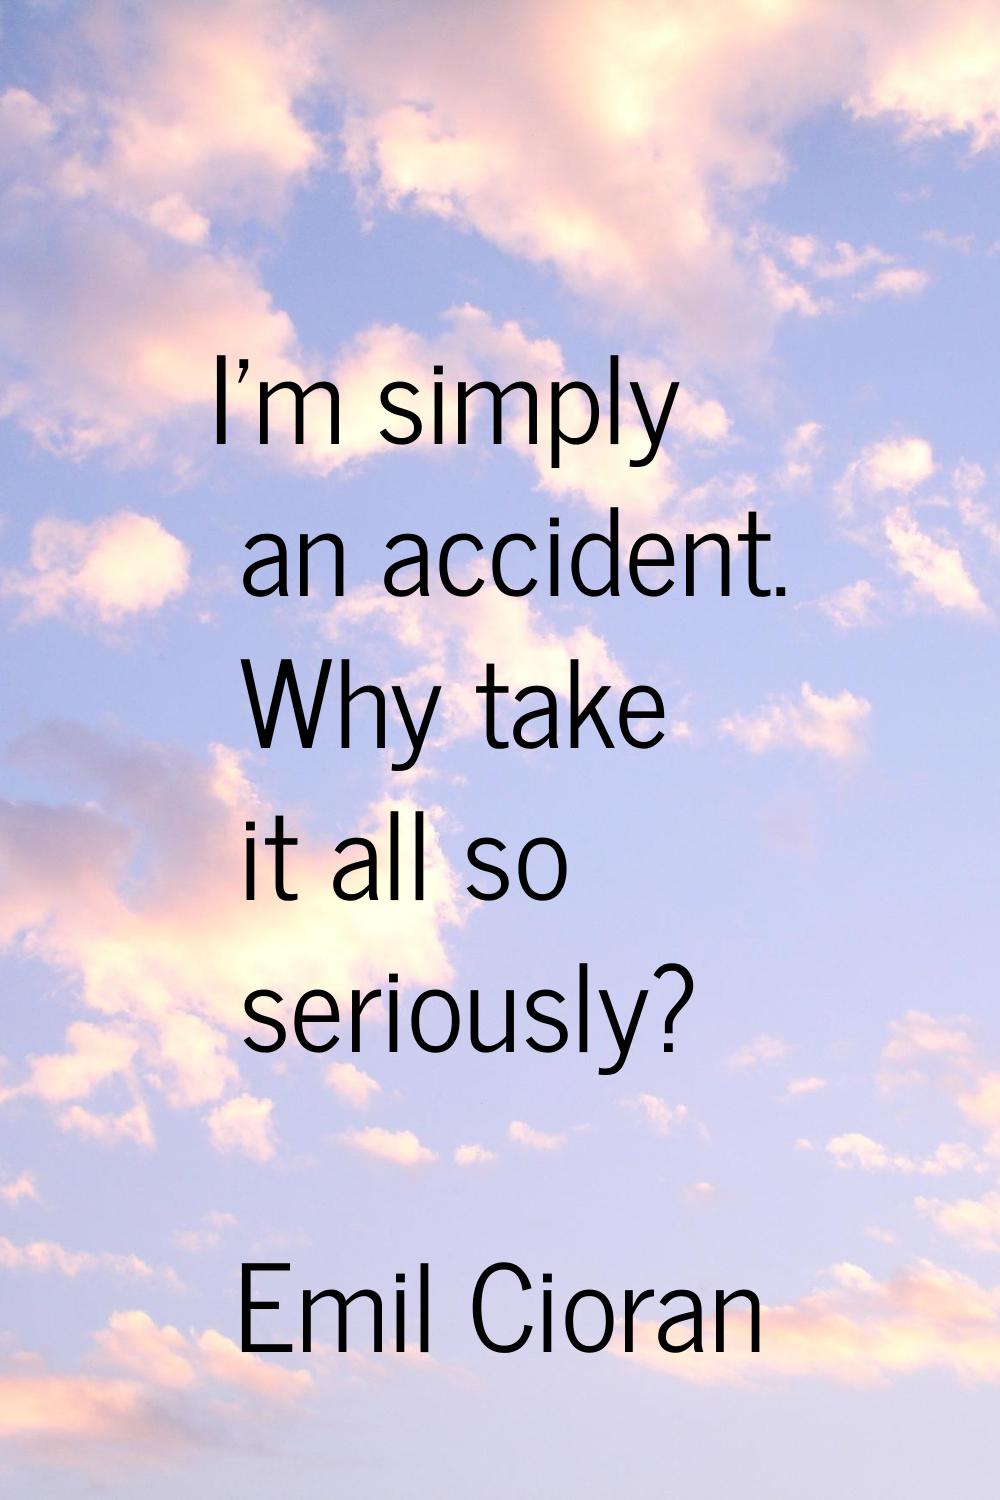 I'm simply an accident. Why take it all so seriously?